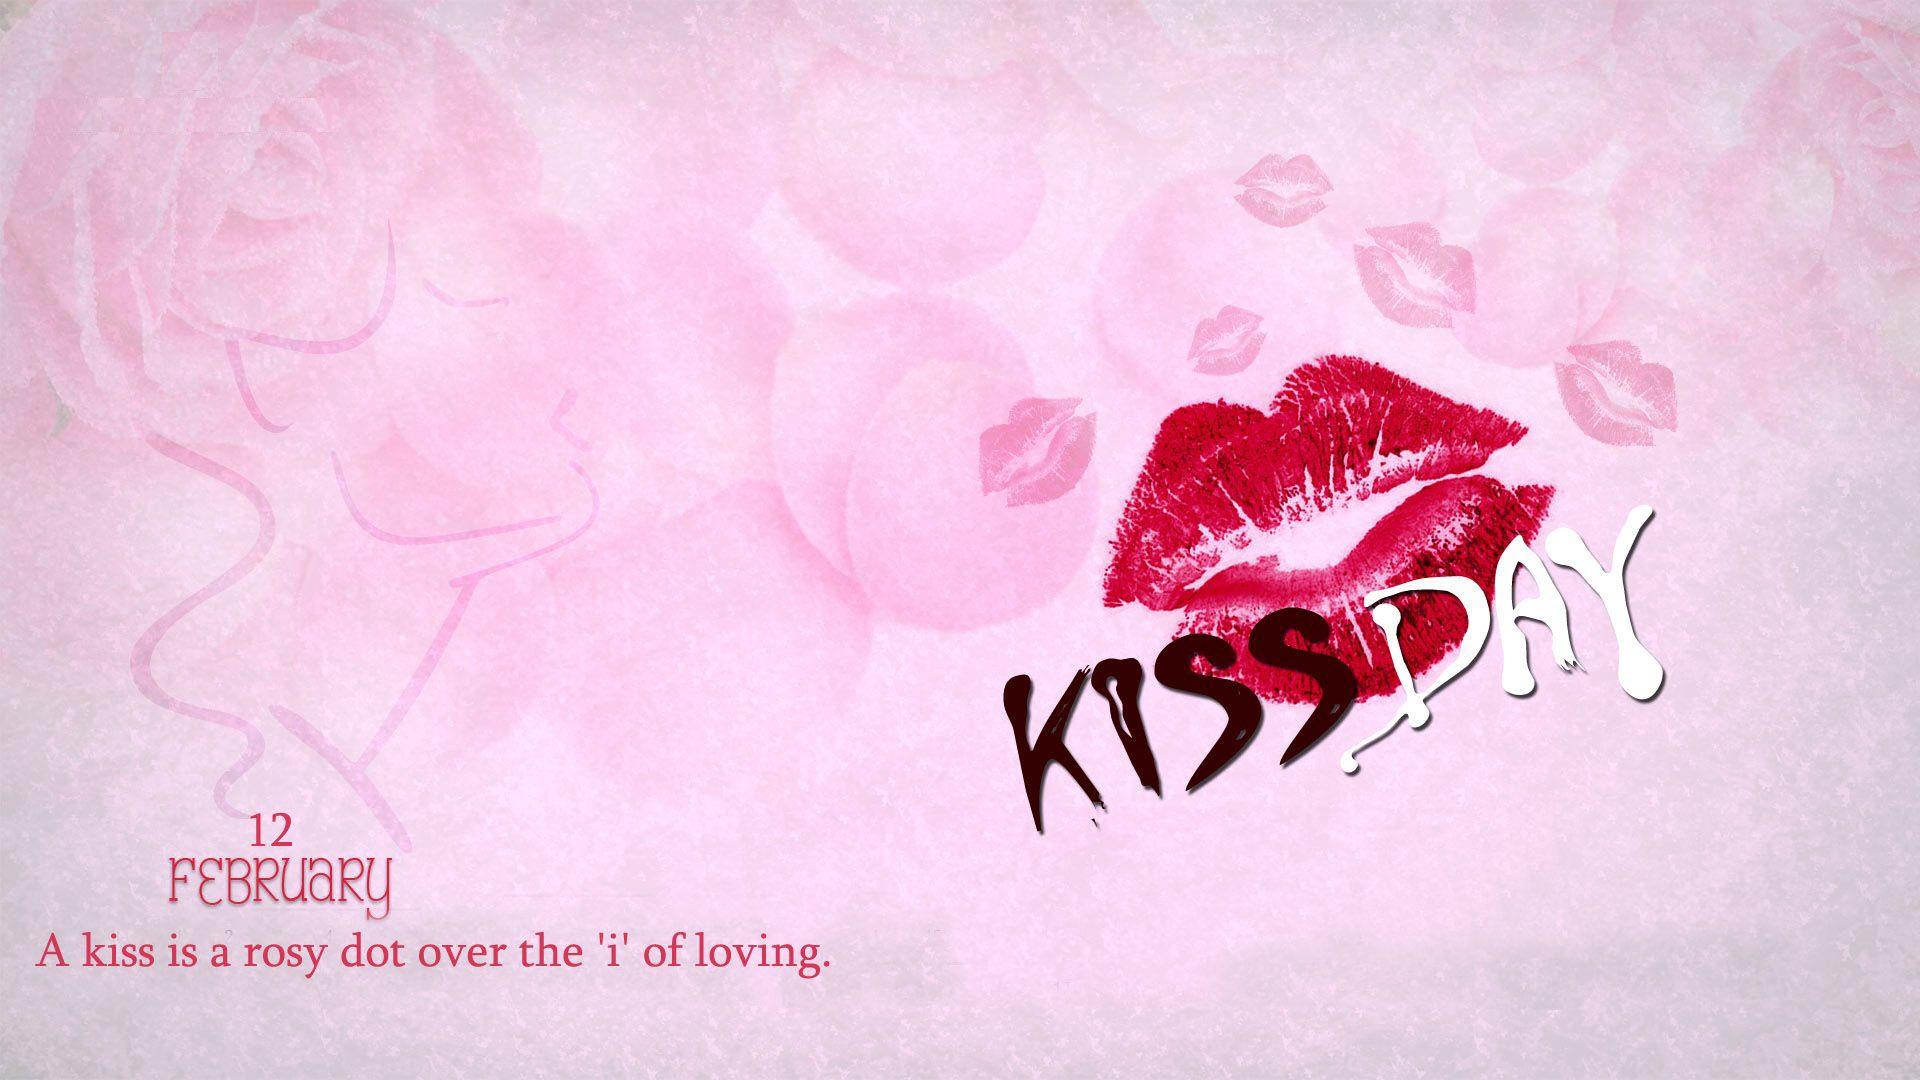 february calendar kiss day wallpaper download. Happy kiss day